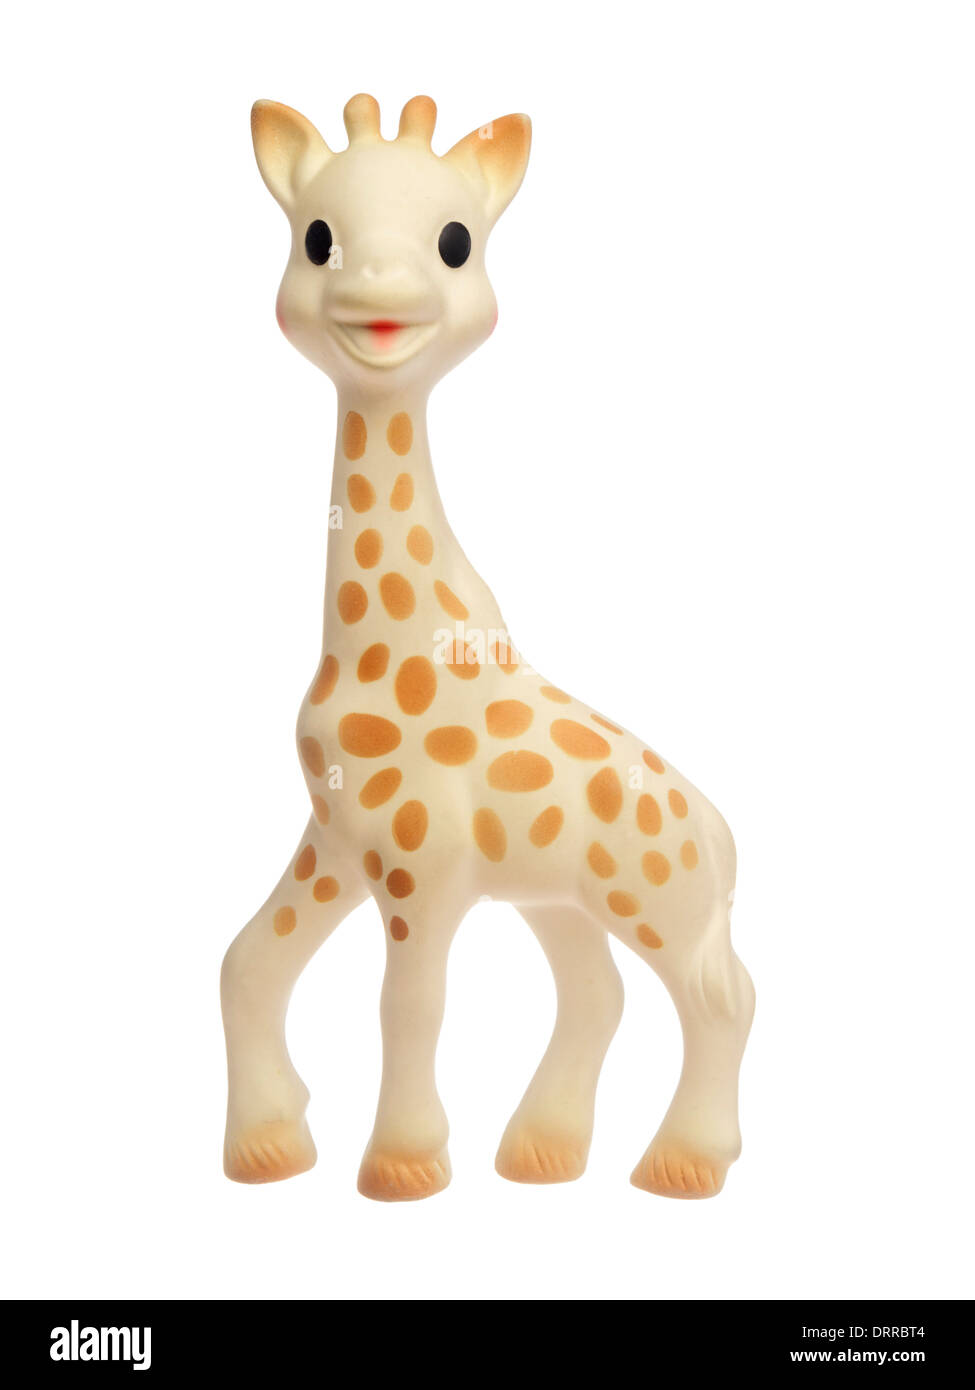 French baby teether toy Sophie the giraffe Stock Photo